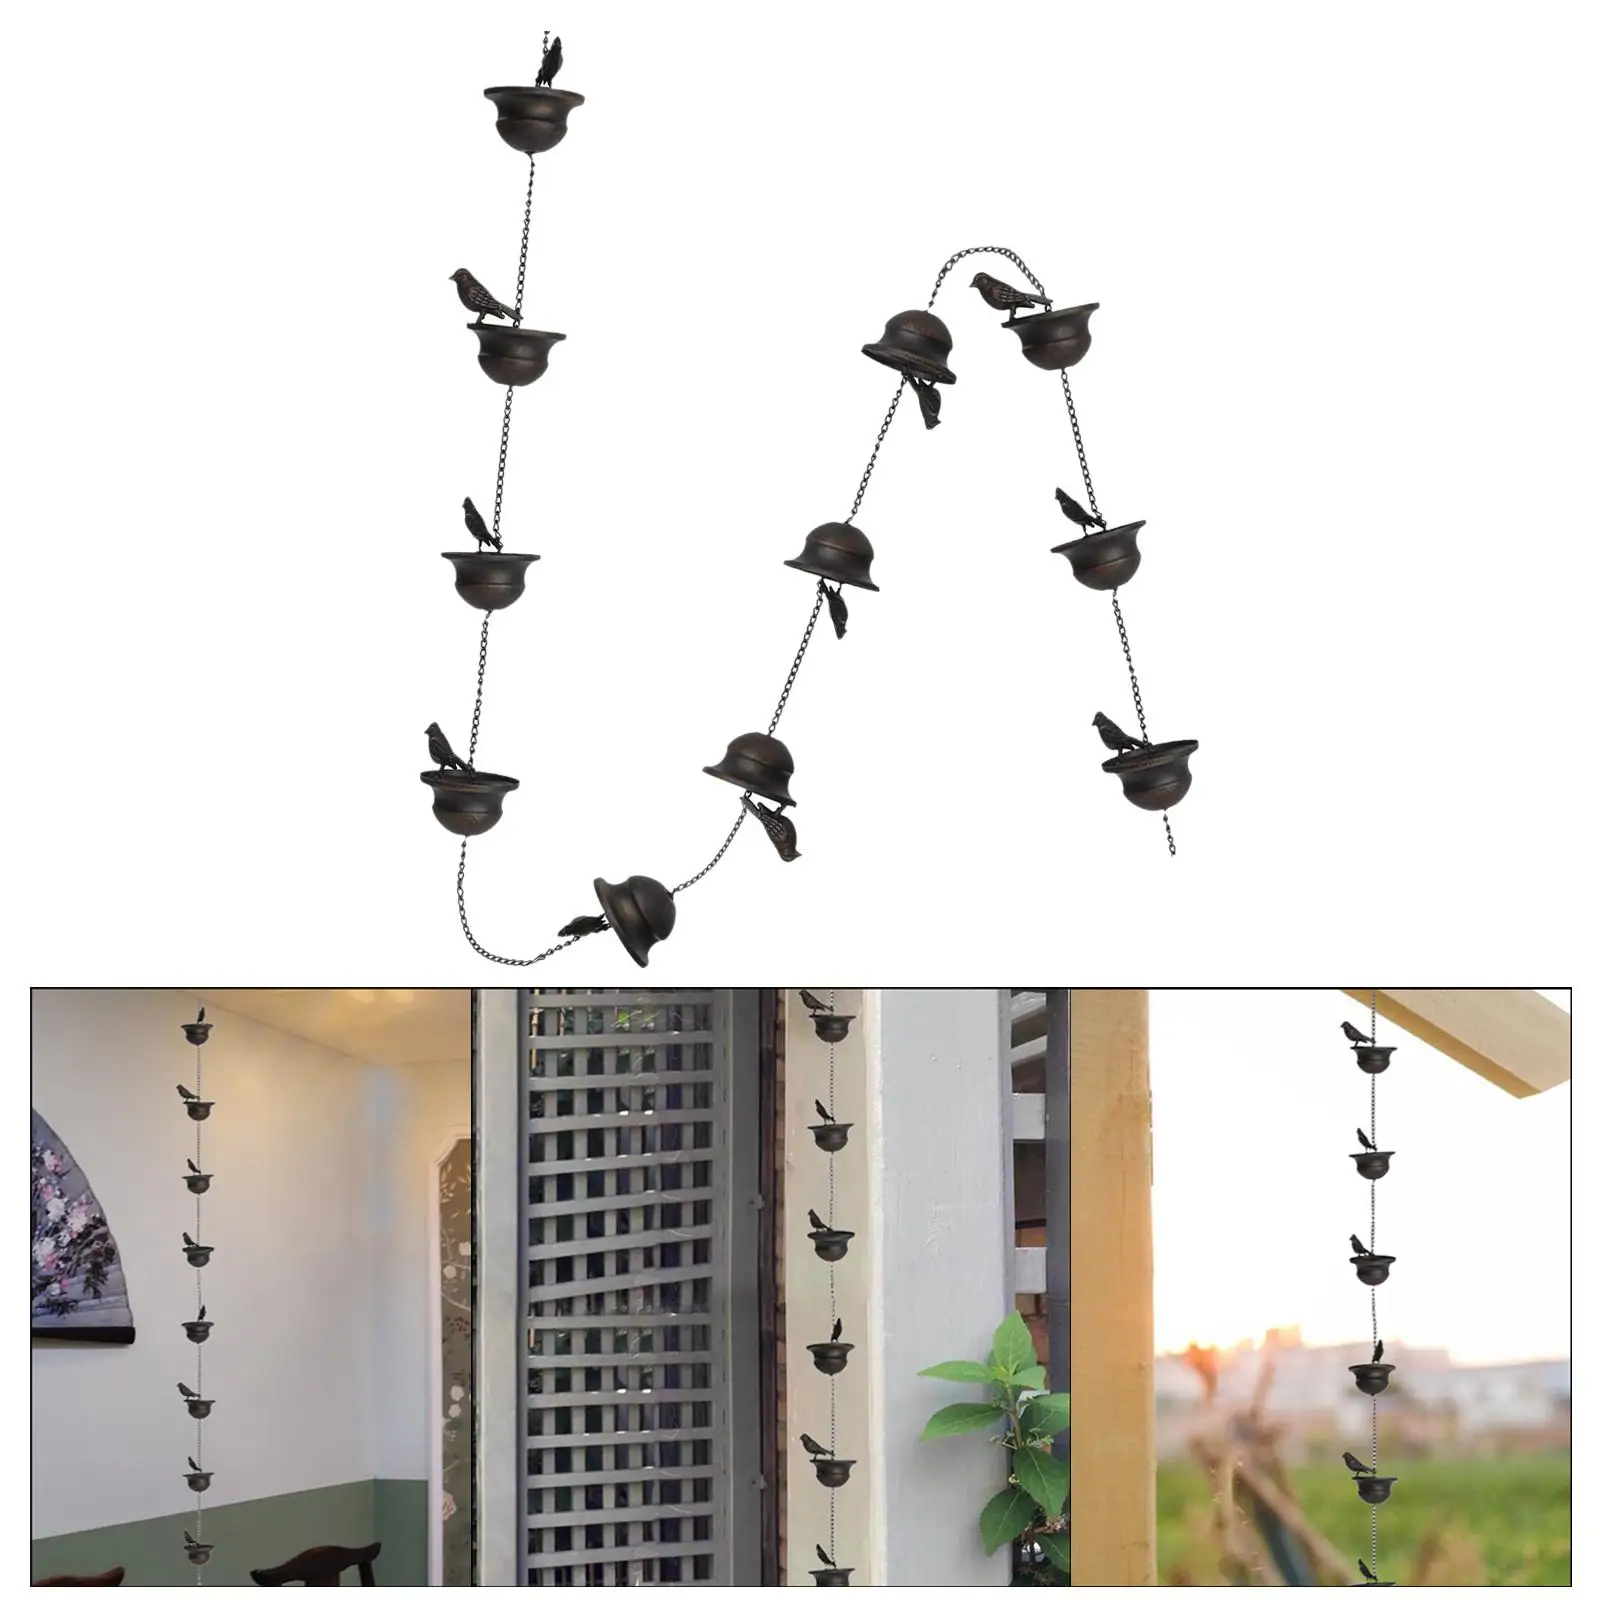 Bird Rain Chains for Gutters Replacement Downspouts Outside Rain Collector Cups 240cm for Backyard Display Garden Roofs Outdoor